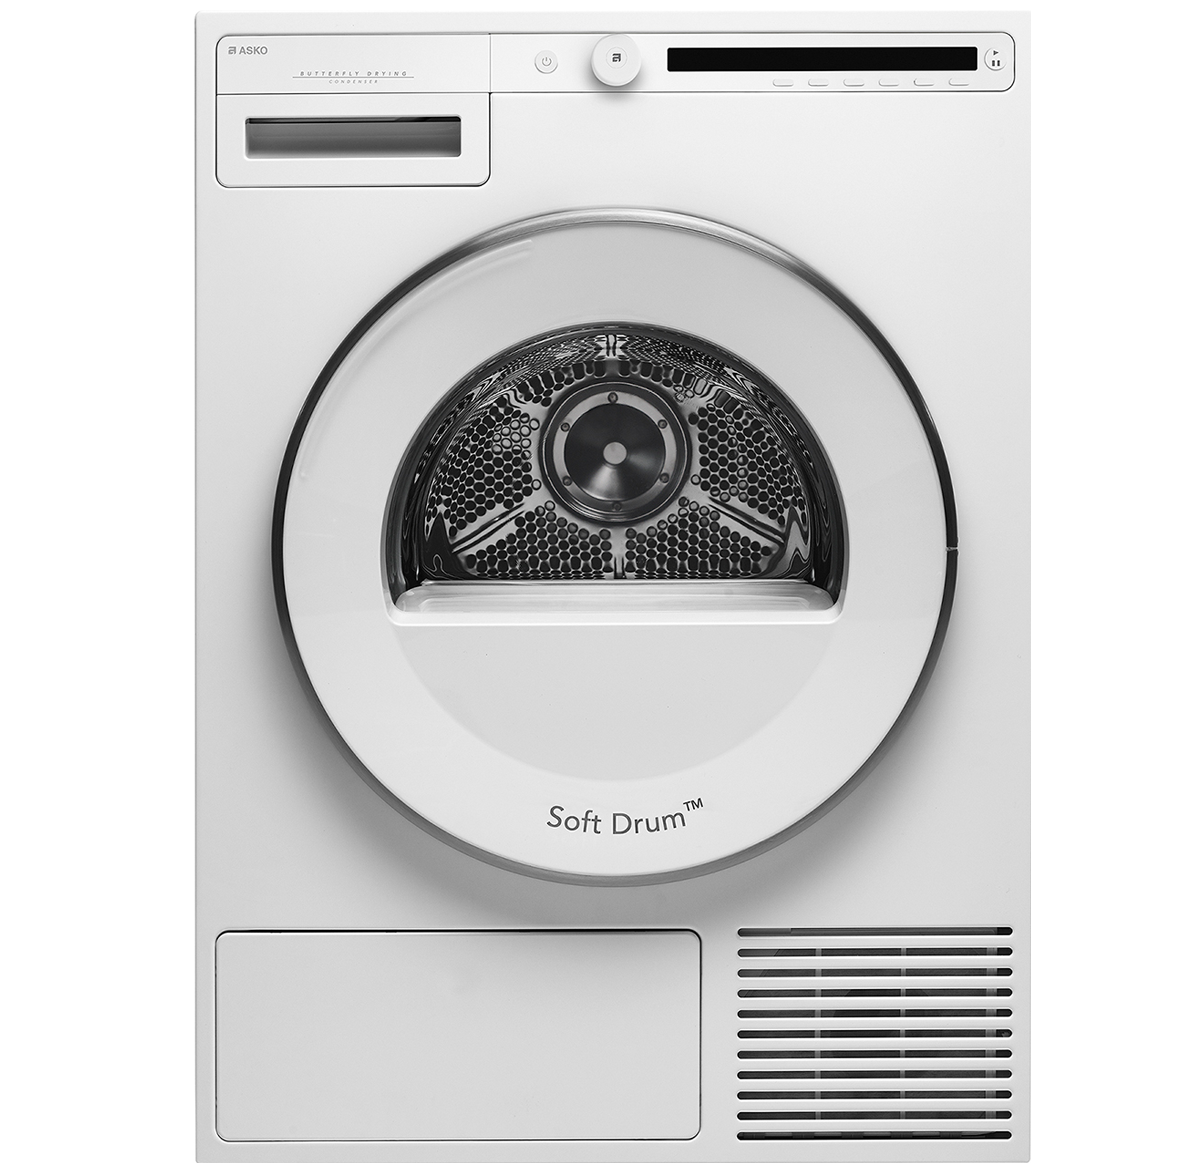 mi-front-load-washer-and-dryer-pro-if-world-design-guide